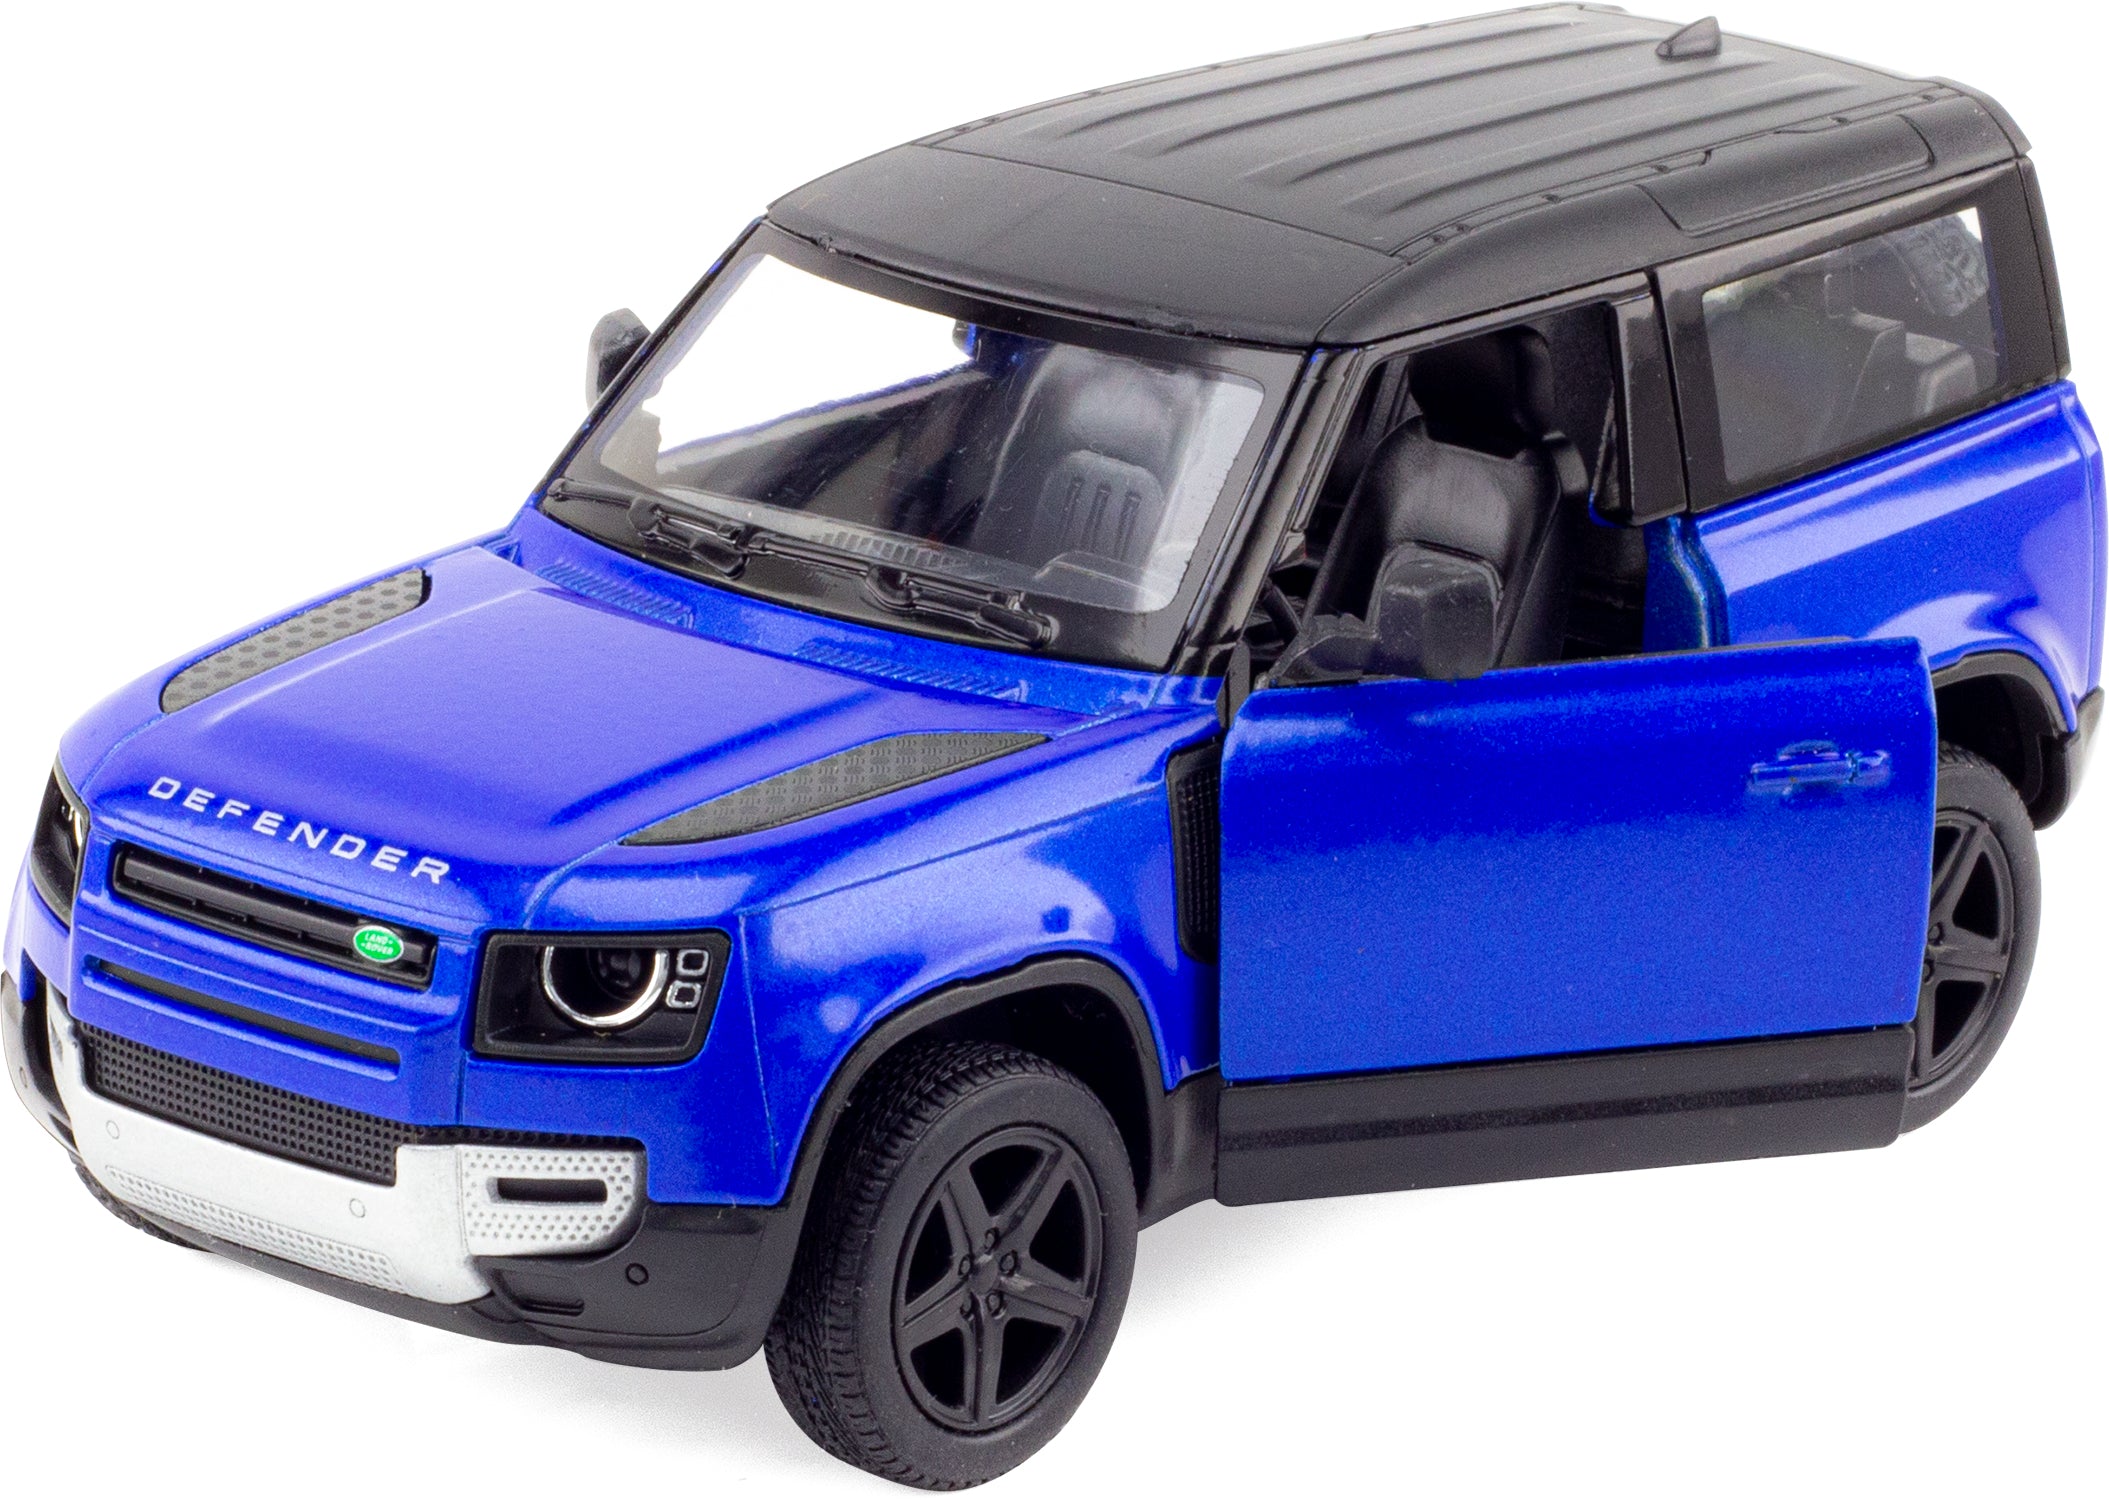 Land Rover Defender - Various colors FX7298